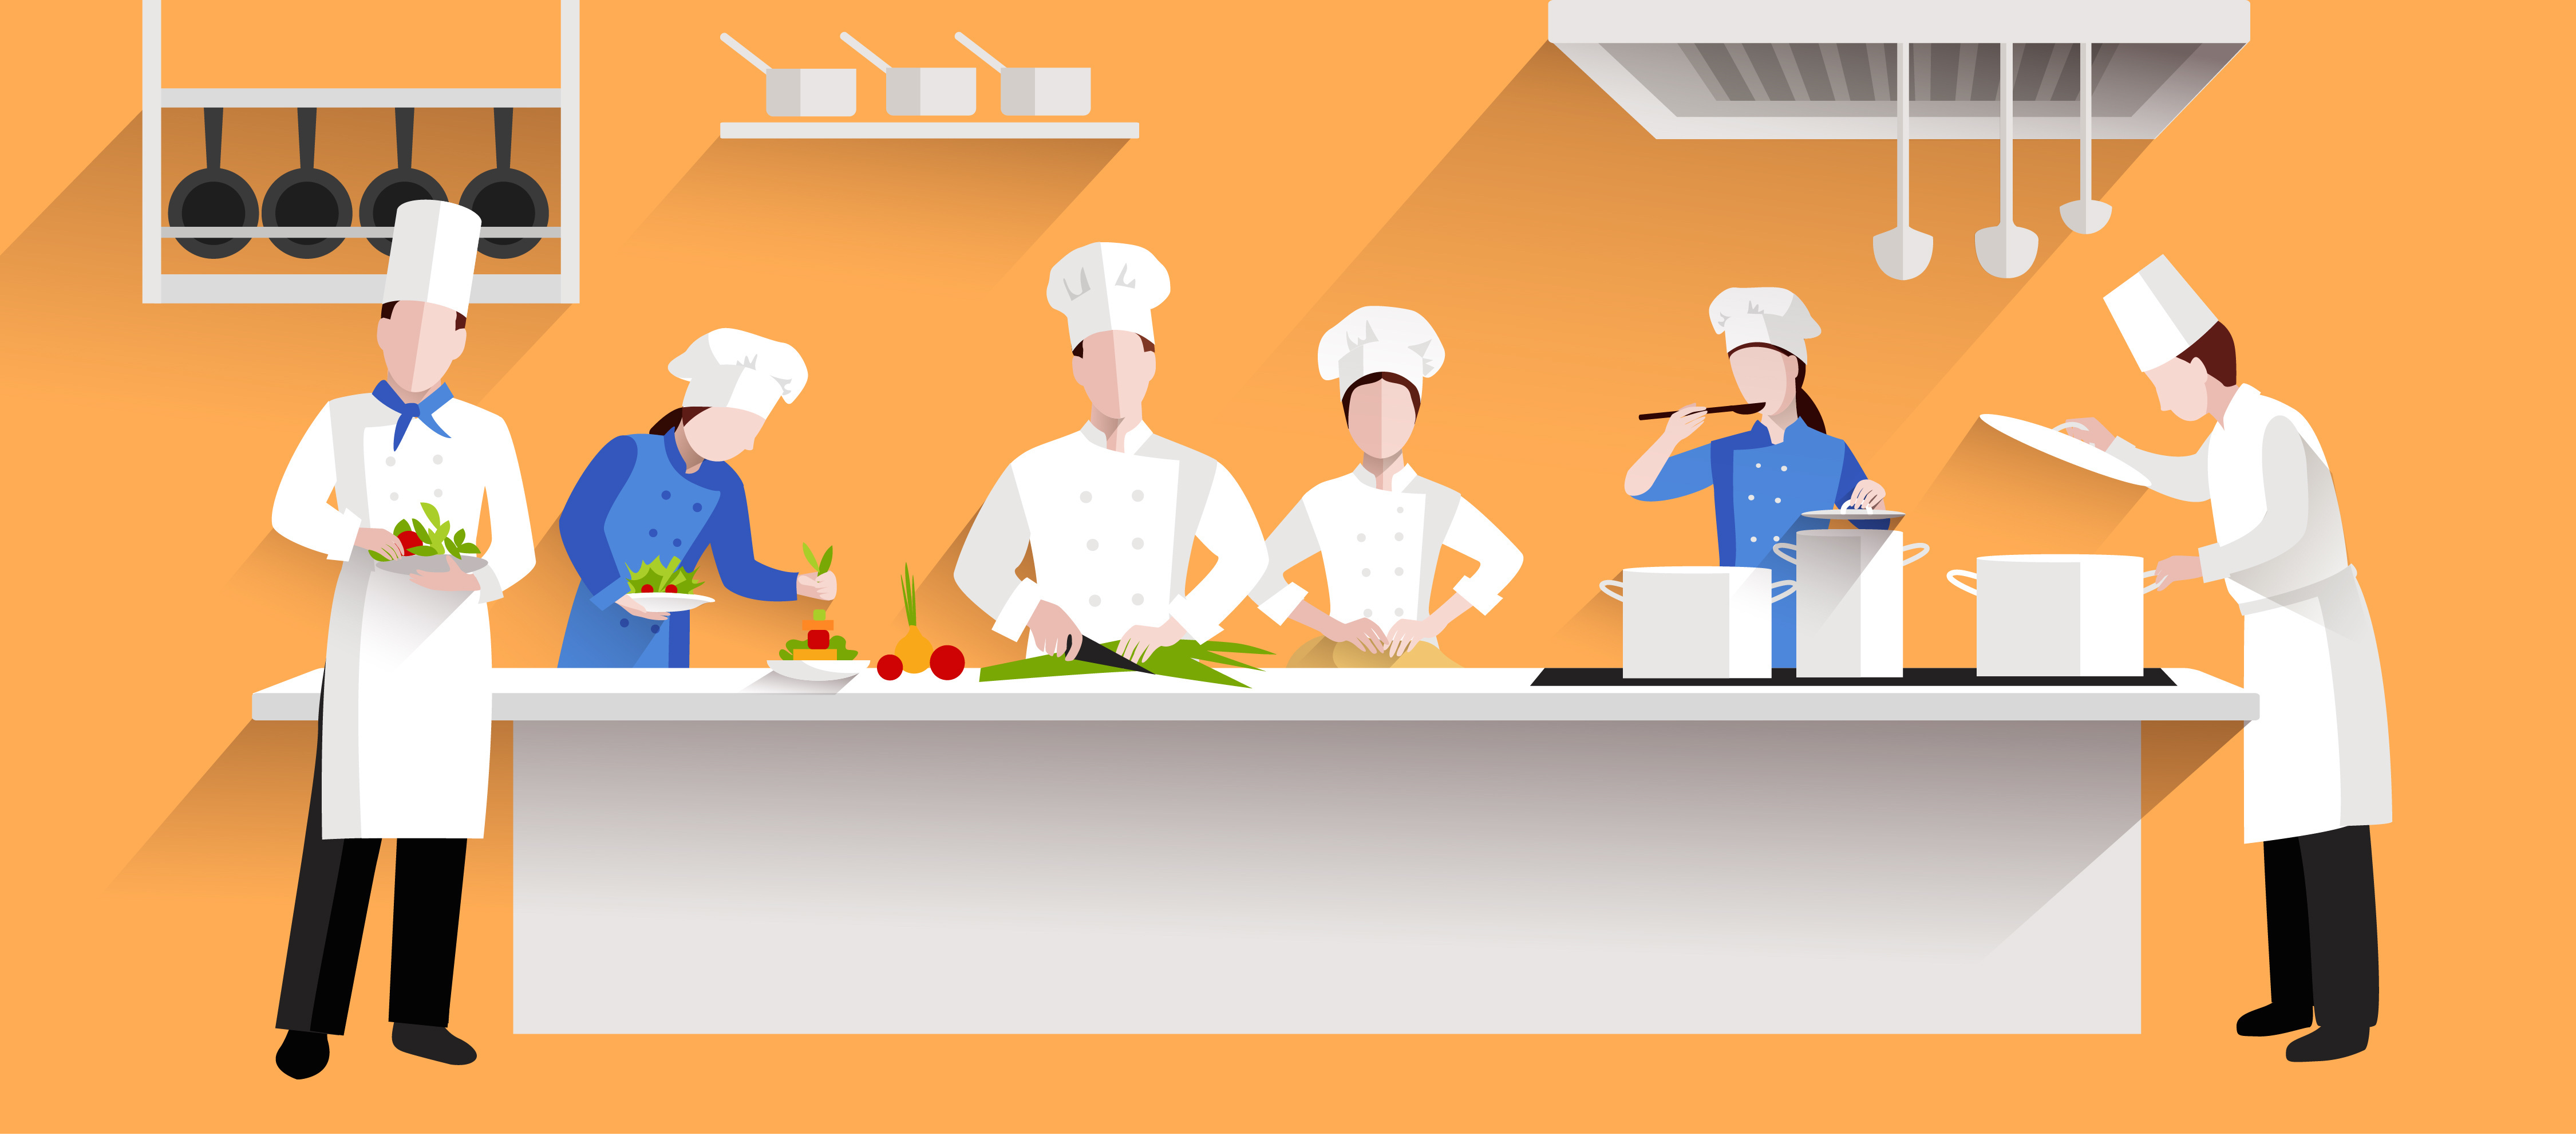 Mobile Strategy for restaurants | Worldlink Integration Group | Cooking process with chef figures at the table in restaurant kitchen interior in an isolated vector illustration